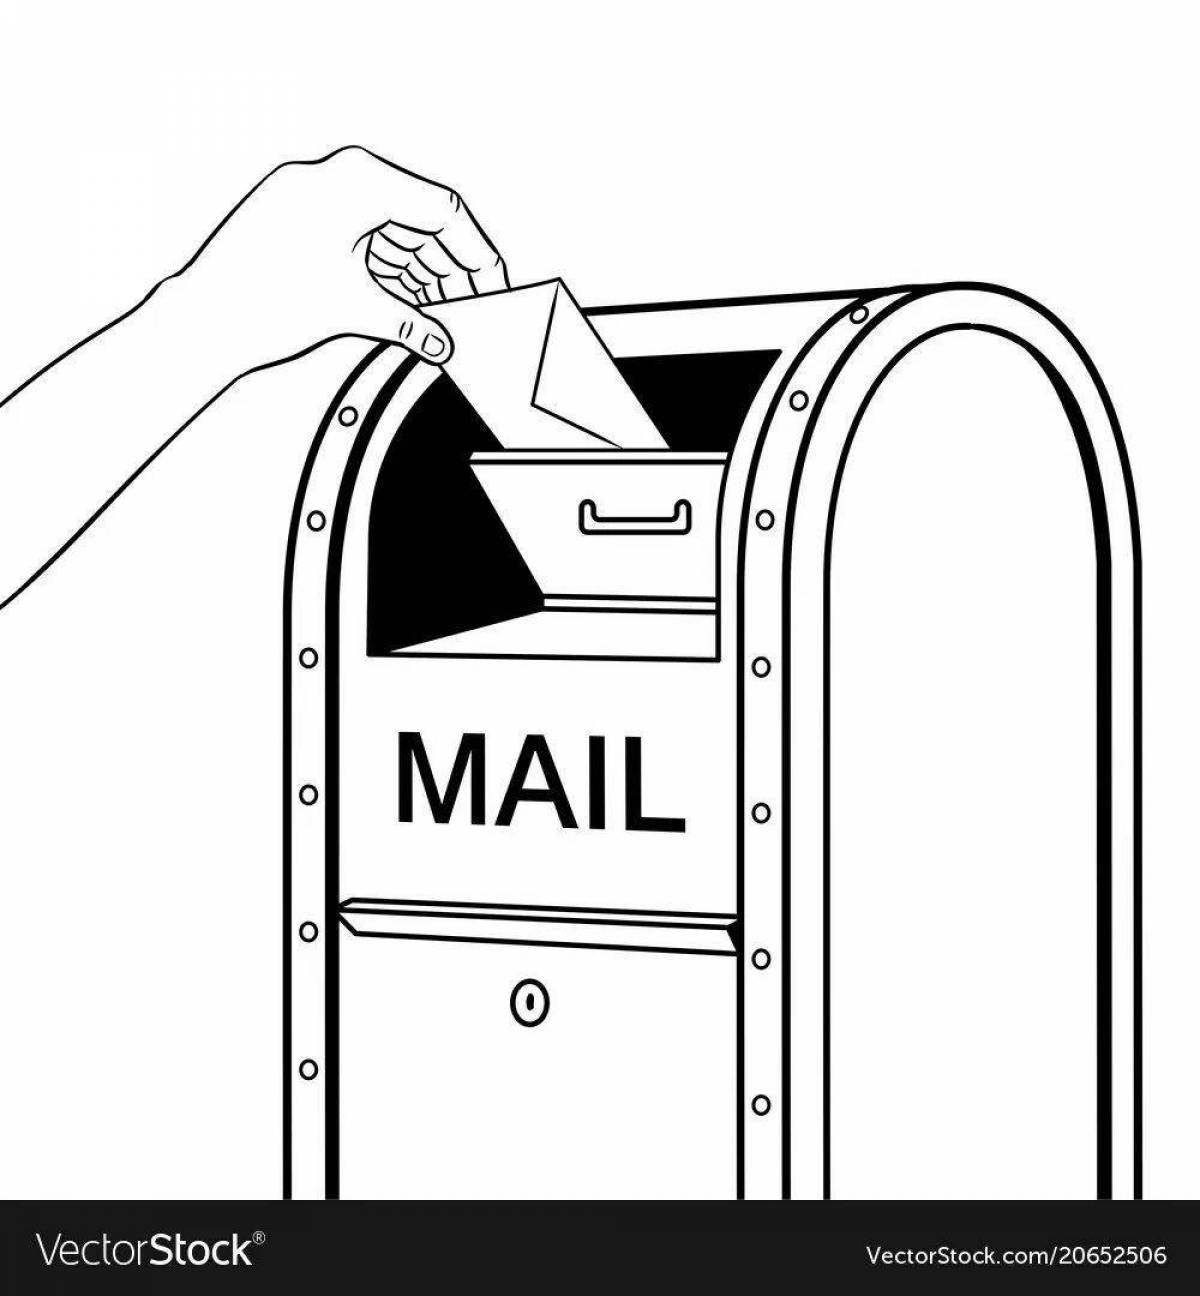 Fun mail coloring for kids